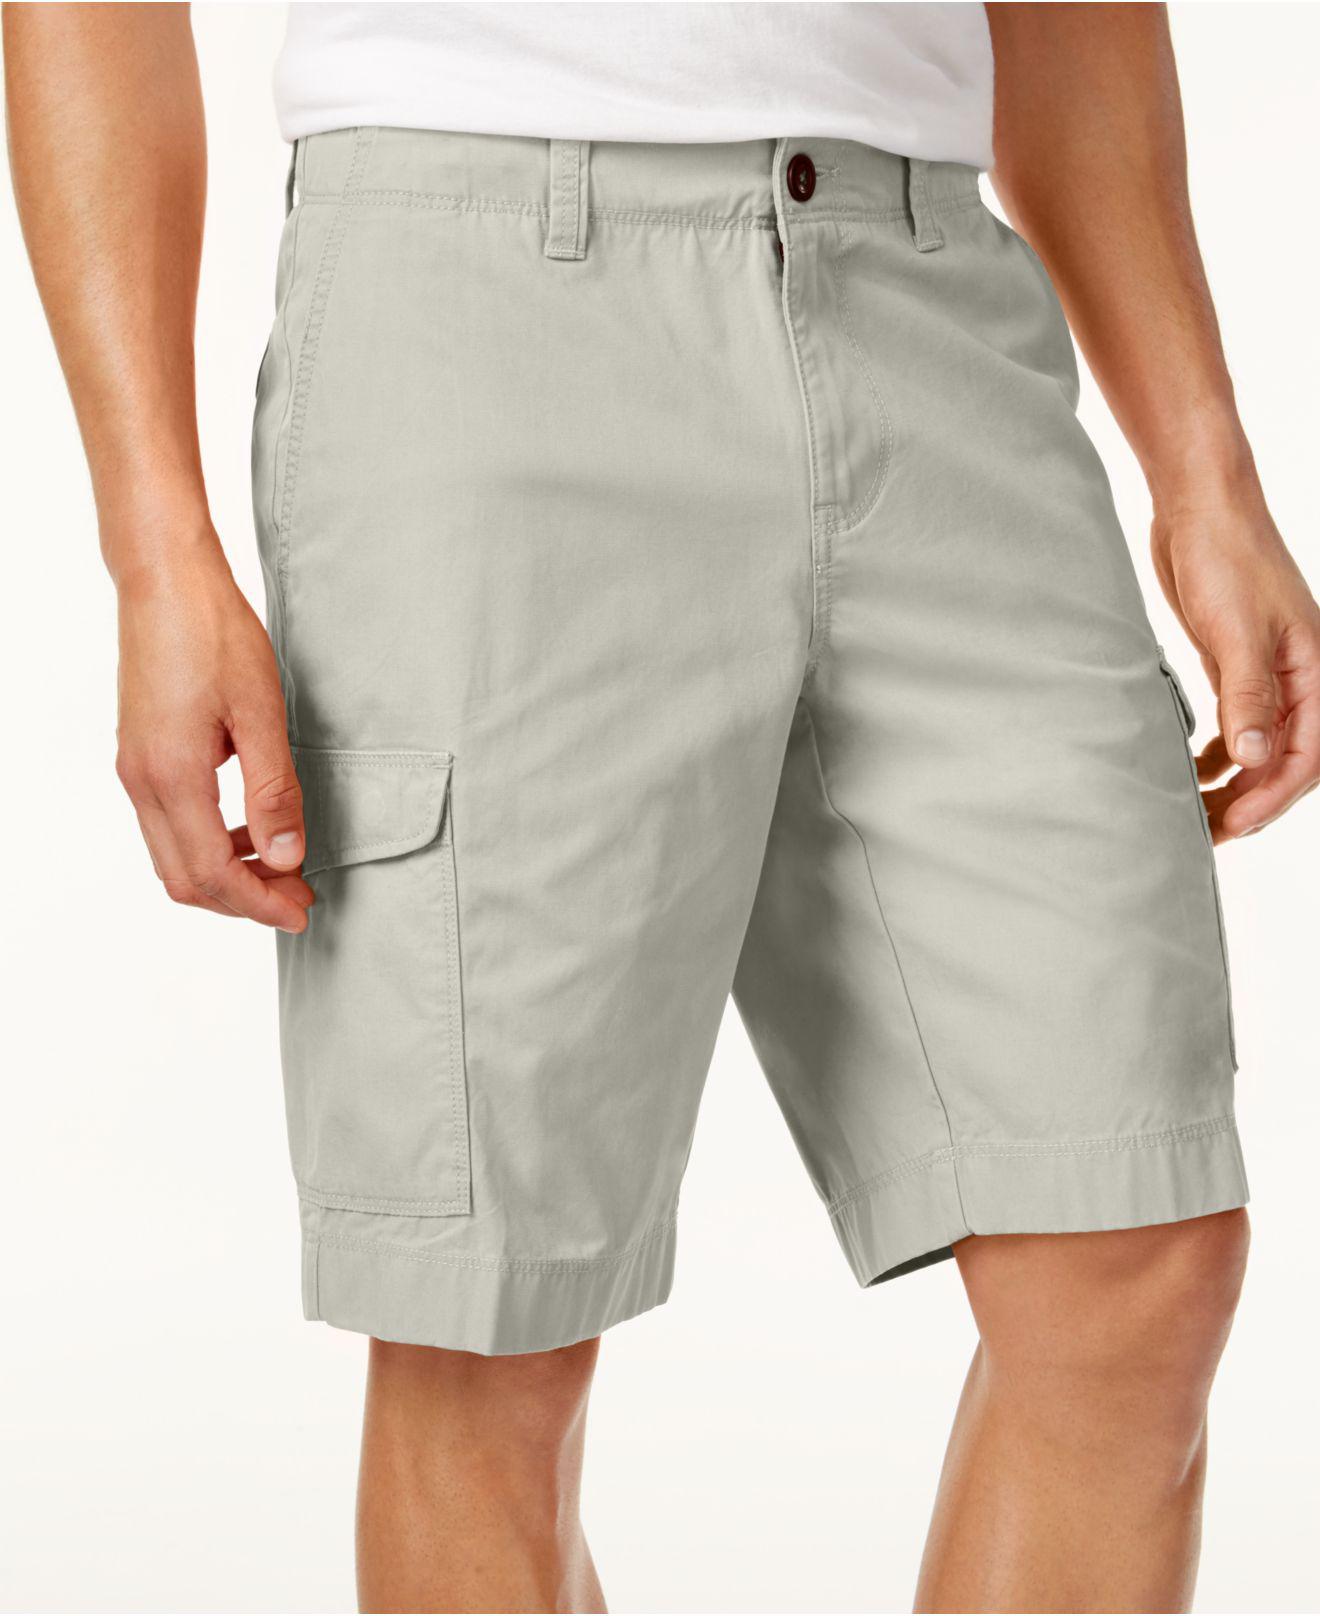 Lyst - Tommy Hilfiger Big And Tall Classic Cargo Shorts in Gray for Men